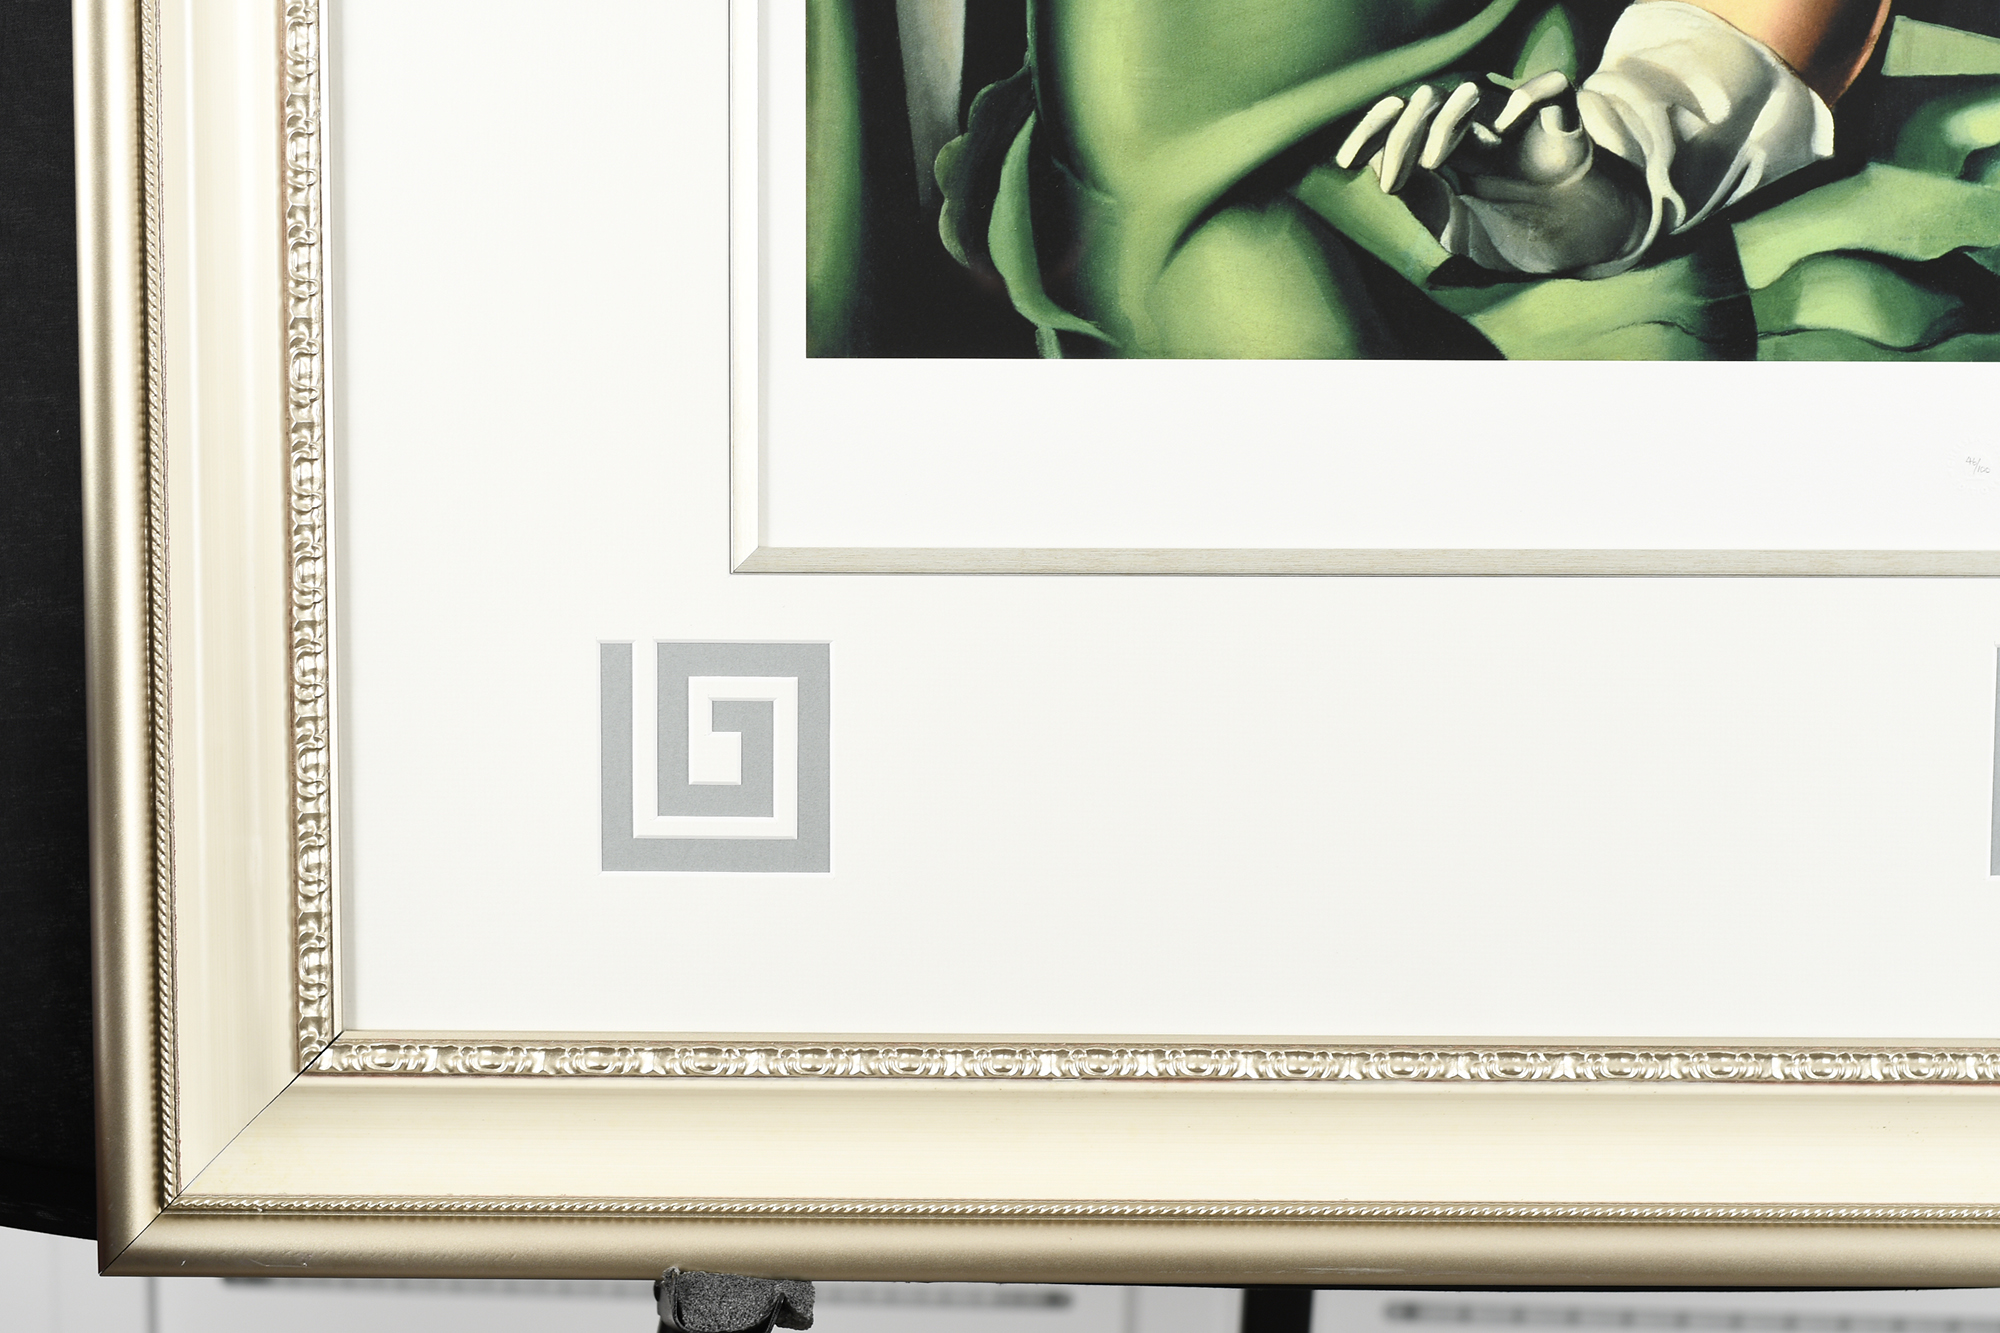 Limited Edition "Young Lady with Gloves" by Tamara De Lempicka - Image 8 of 12